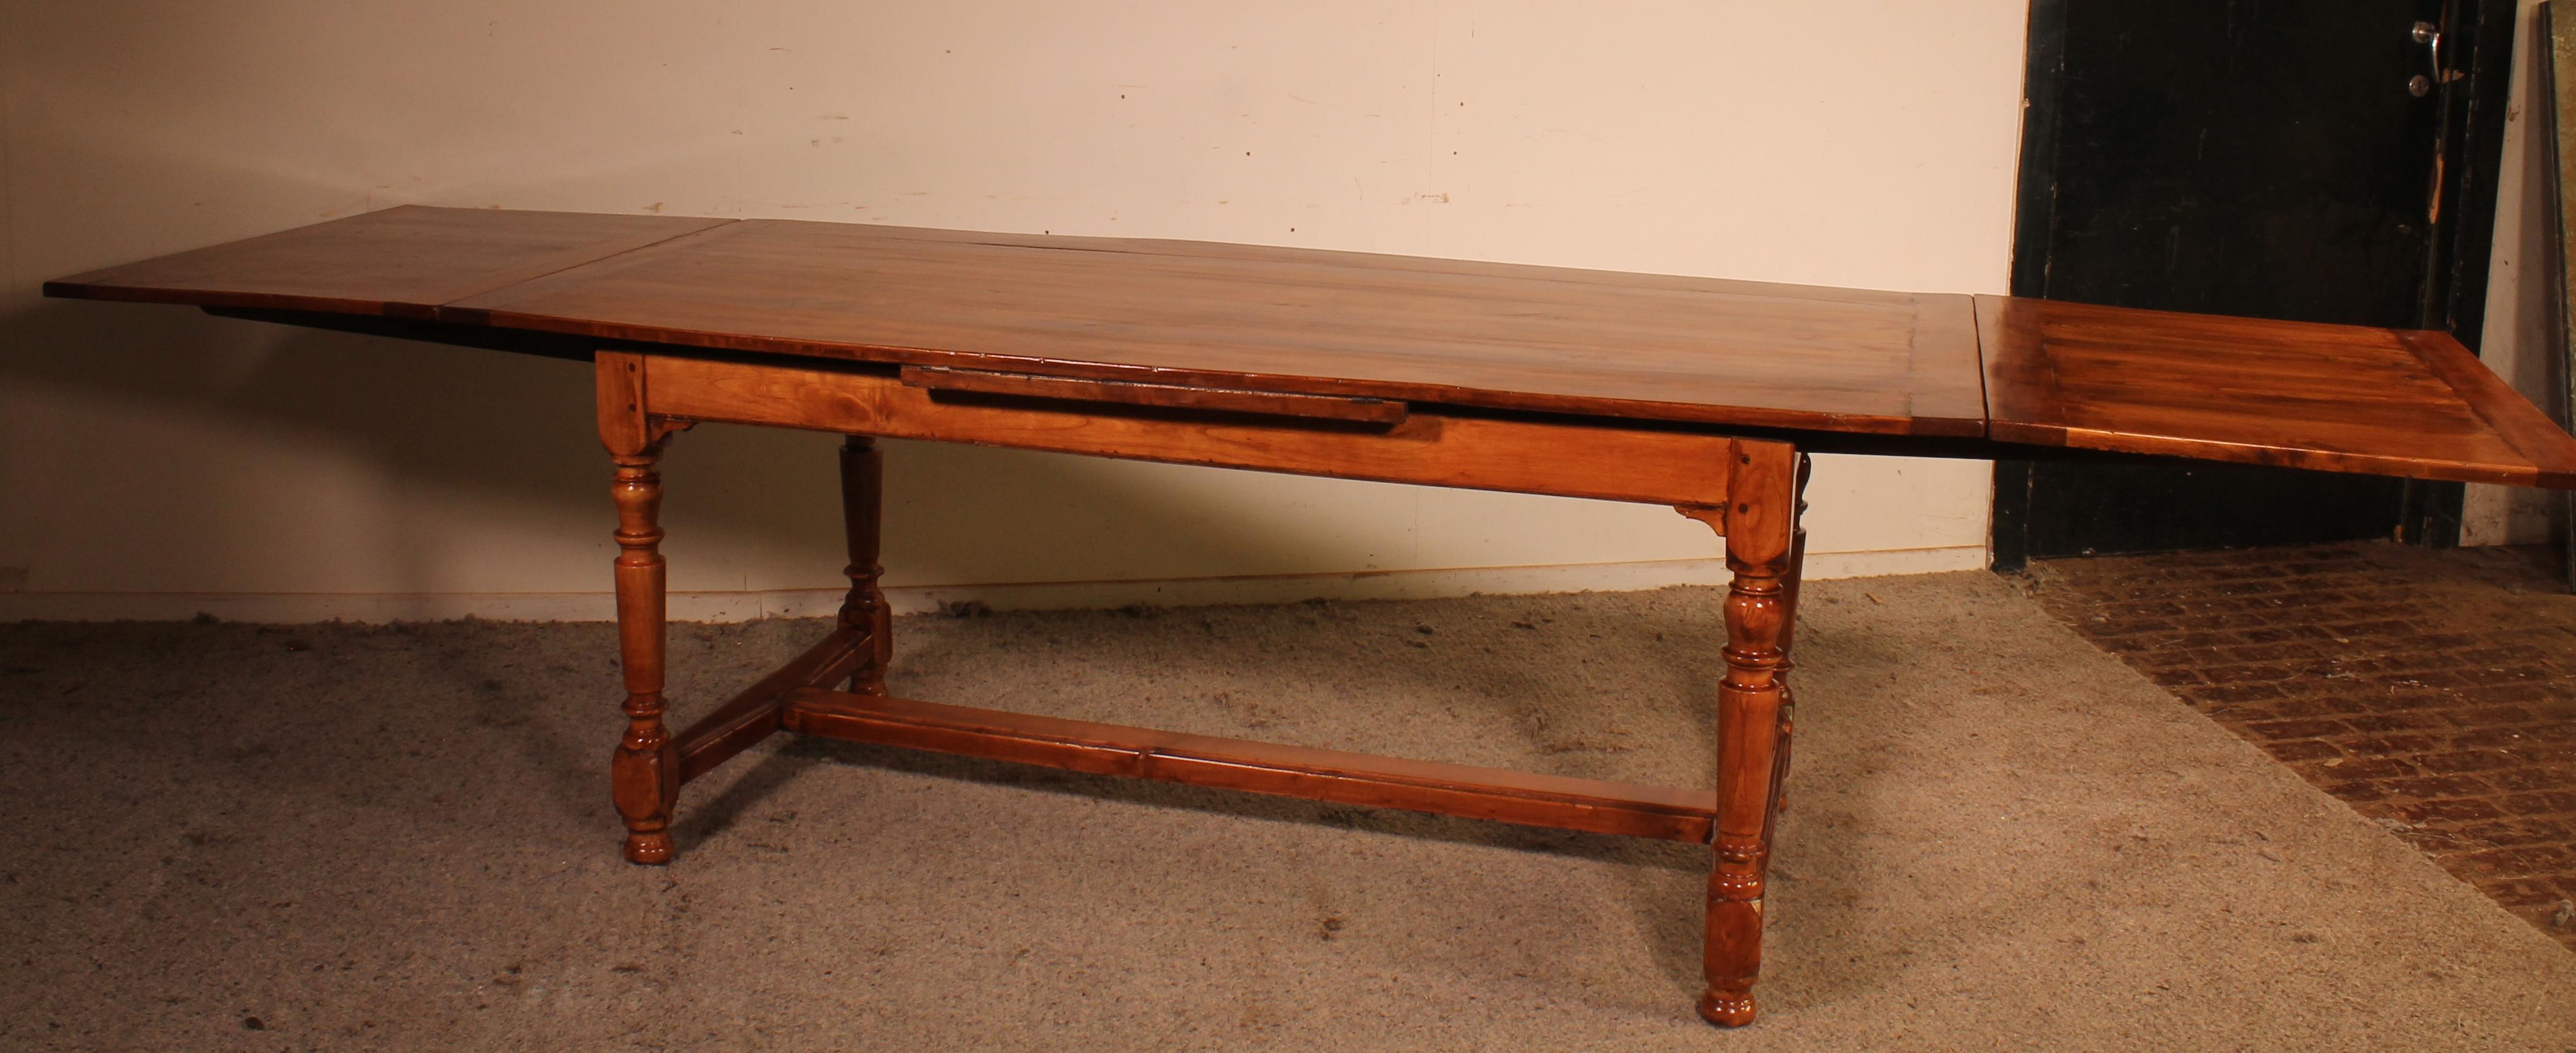 Cherry Extendable Table with Turned Legs, 19th Century, France For Sale